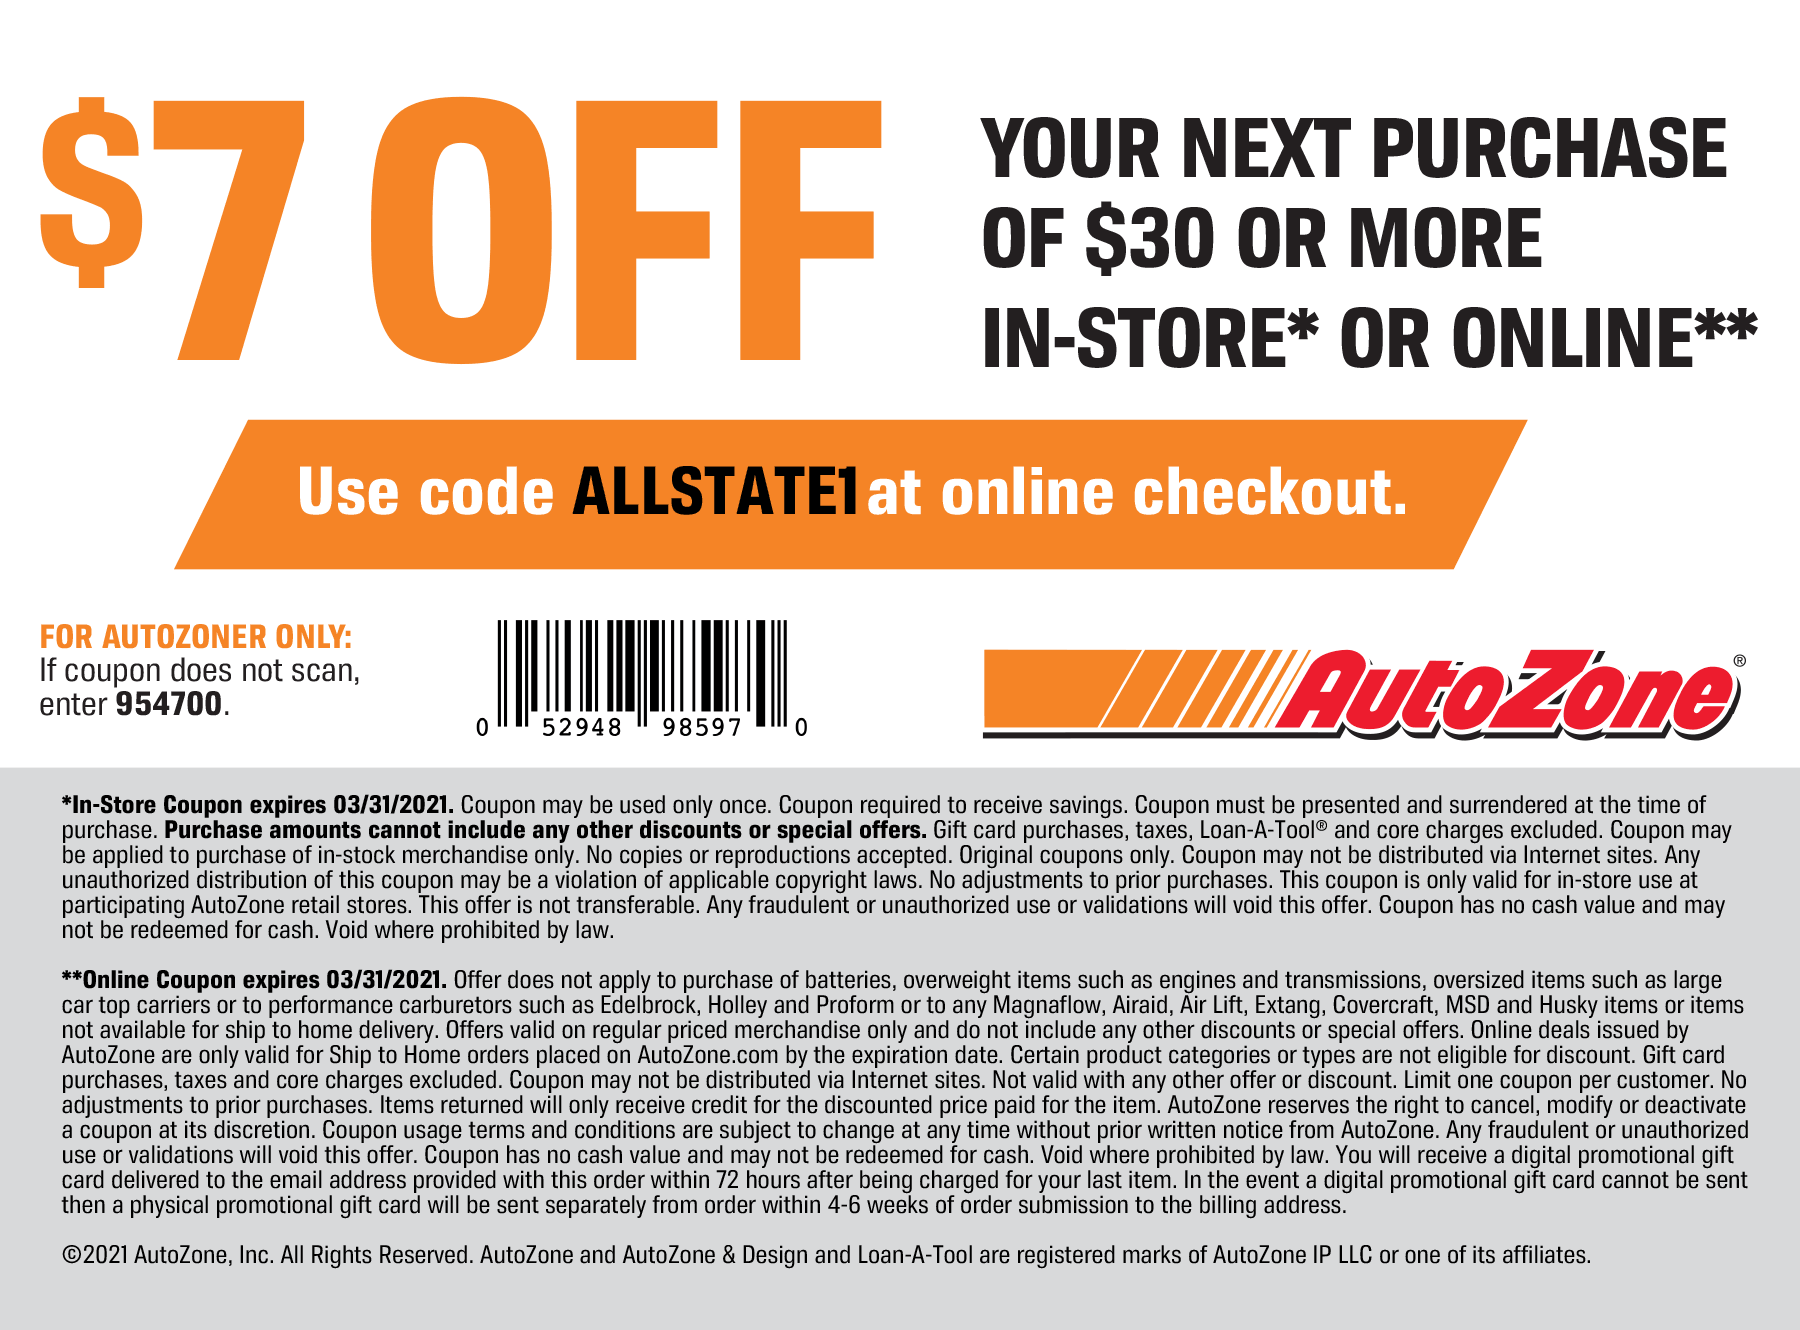 7-off-30-at-autozone-car-parts-or-online-via-promo-code-allstate1